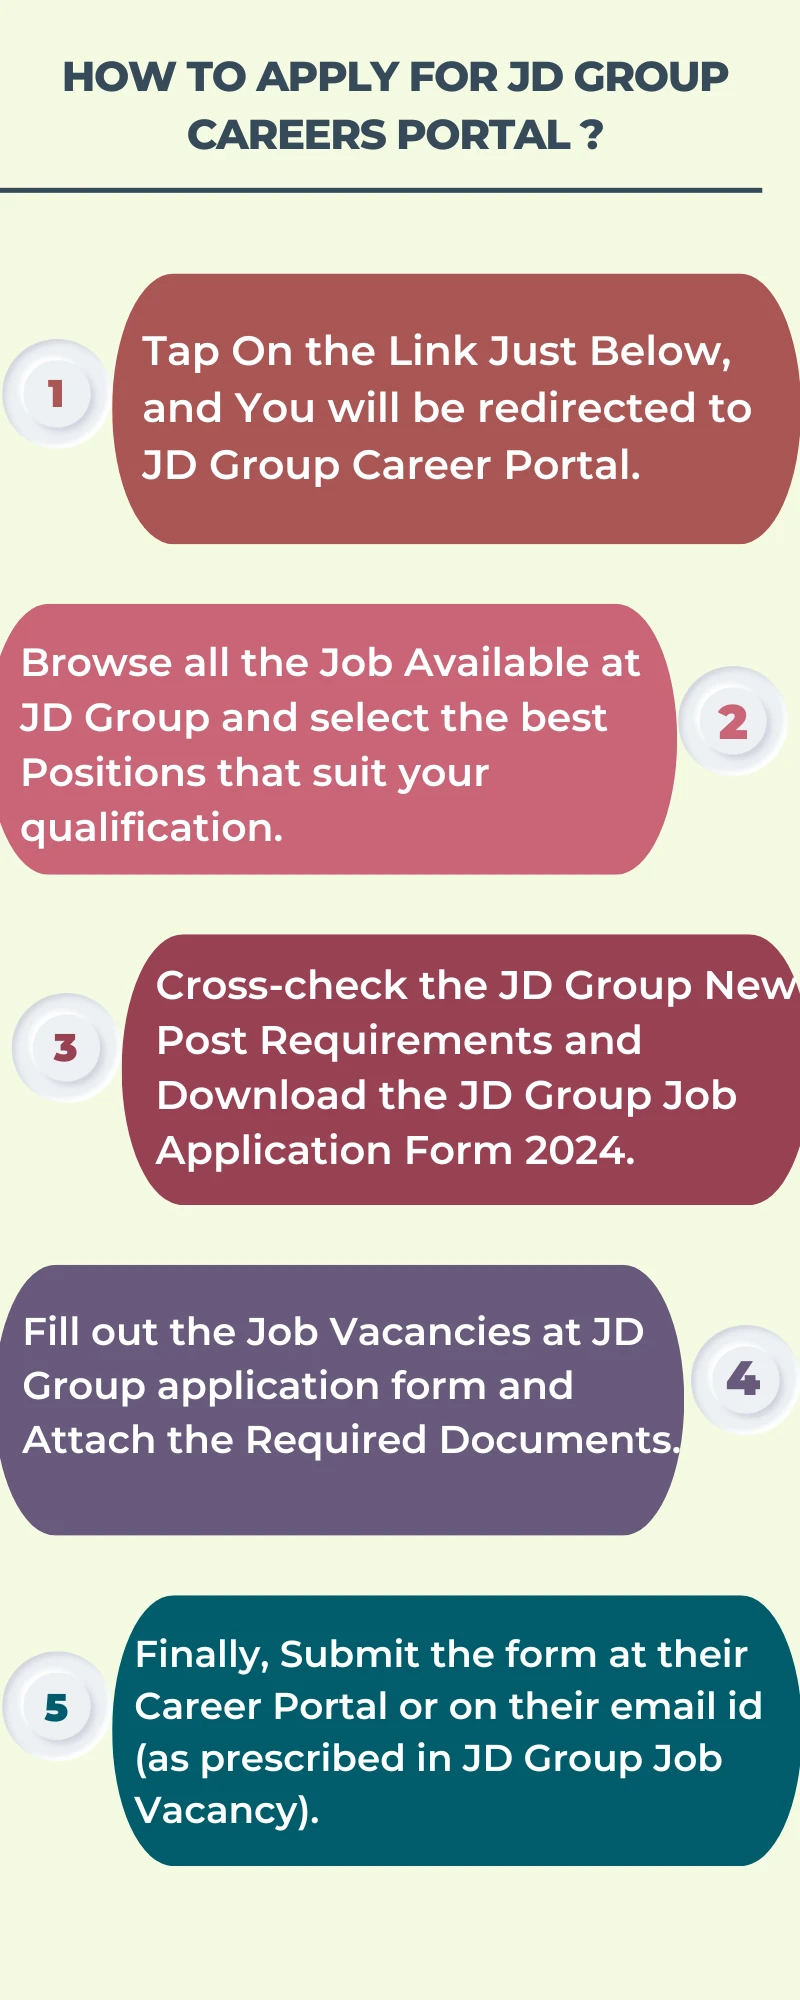 How To Apply for JD Group Careers Portal ?